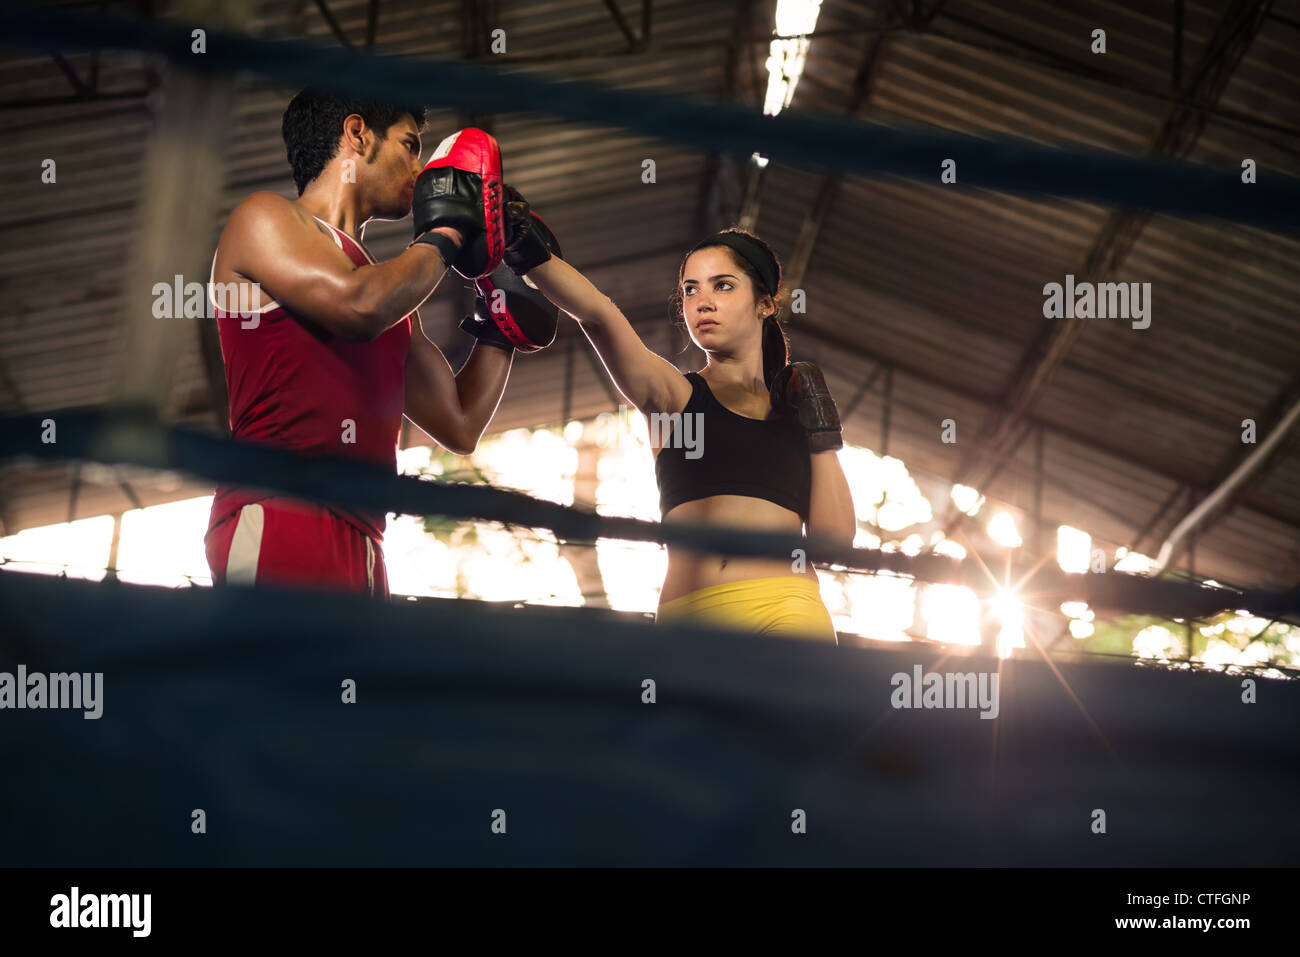 Self Defense Class Woman High Resolution Stock Photography And Images Alamy